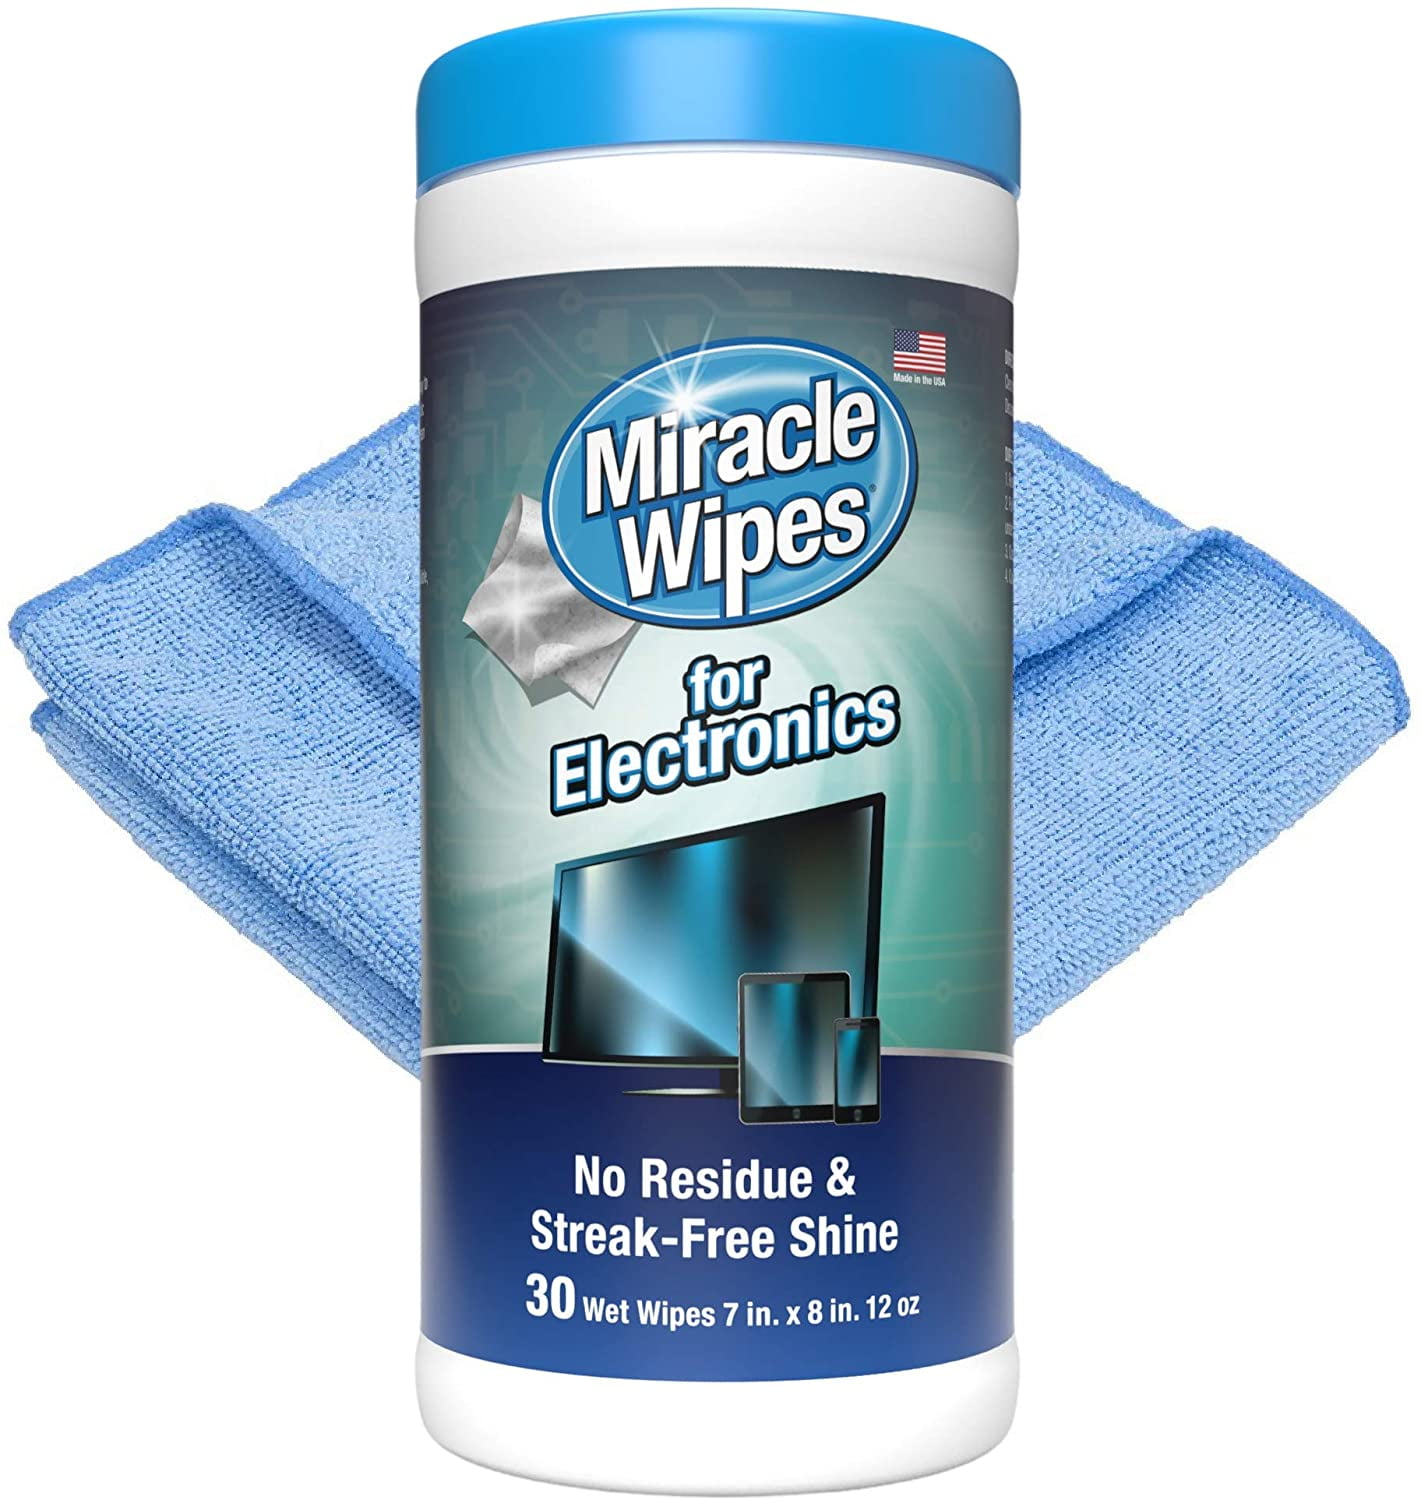 Miracle wipes get fingerprints and smudges off TV screen - DIY